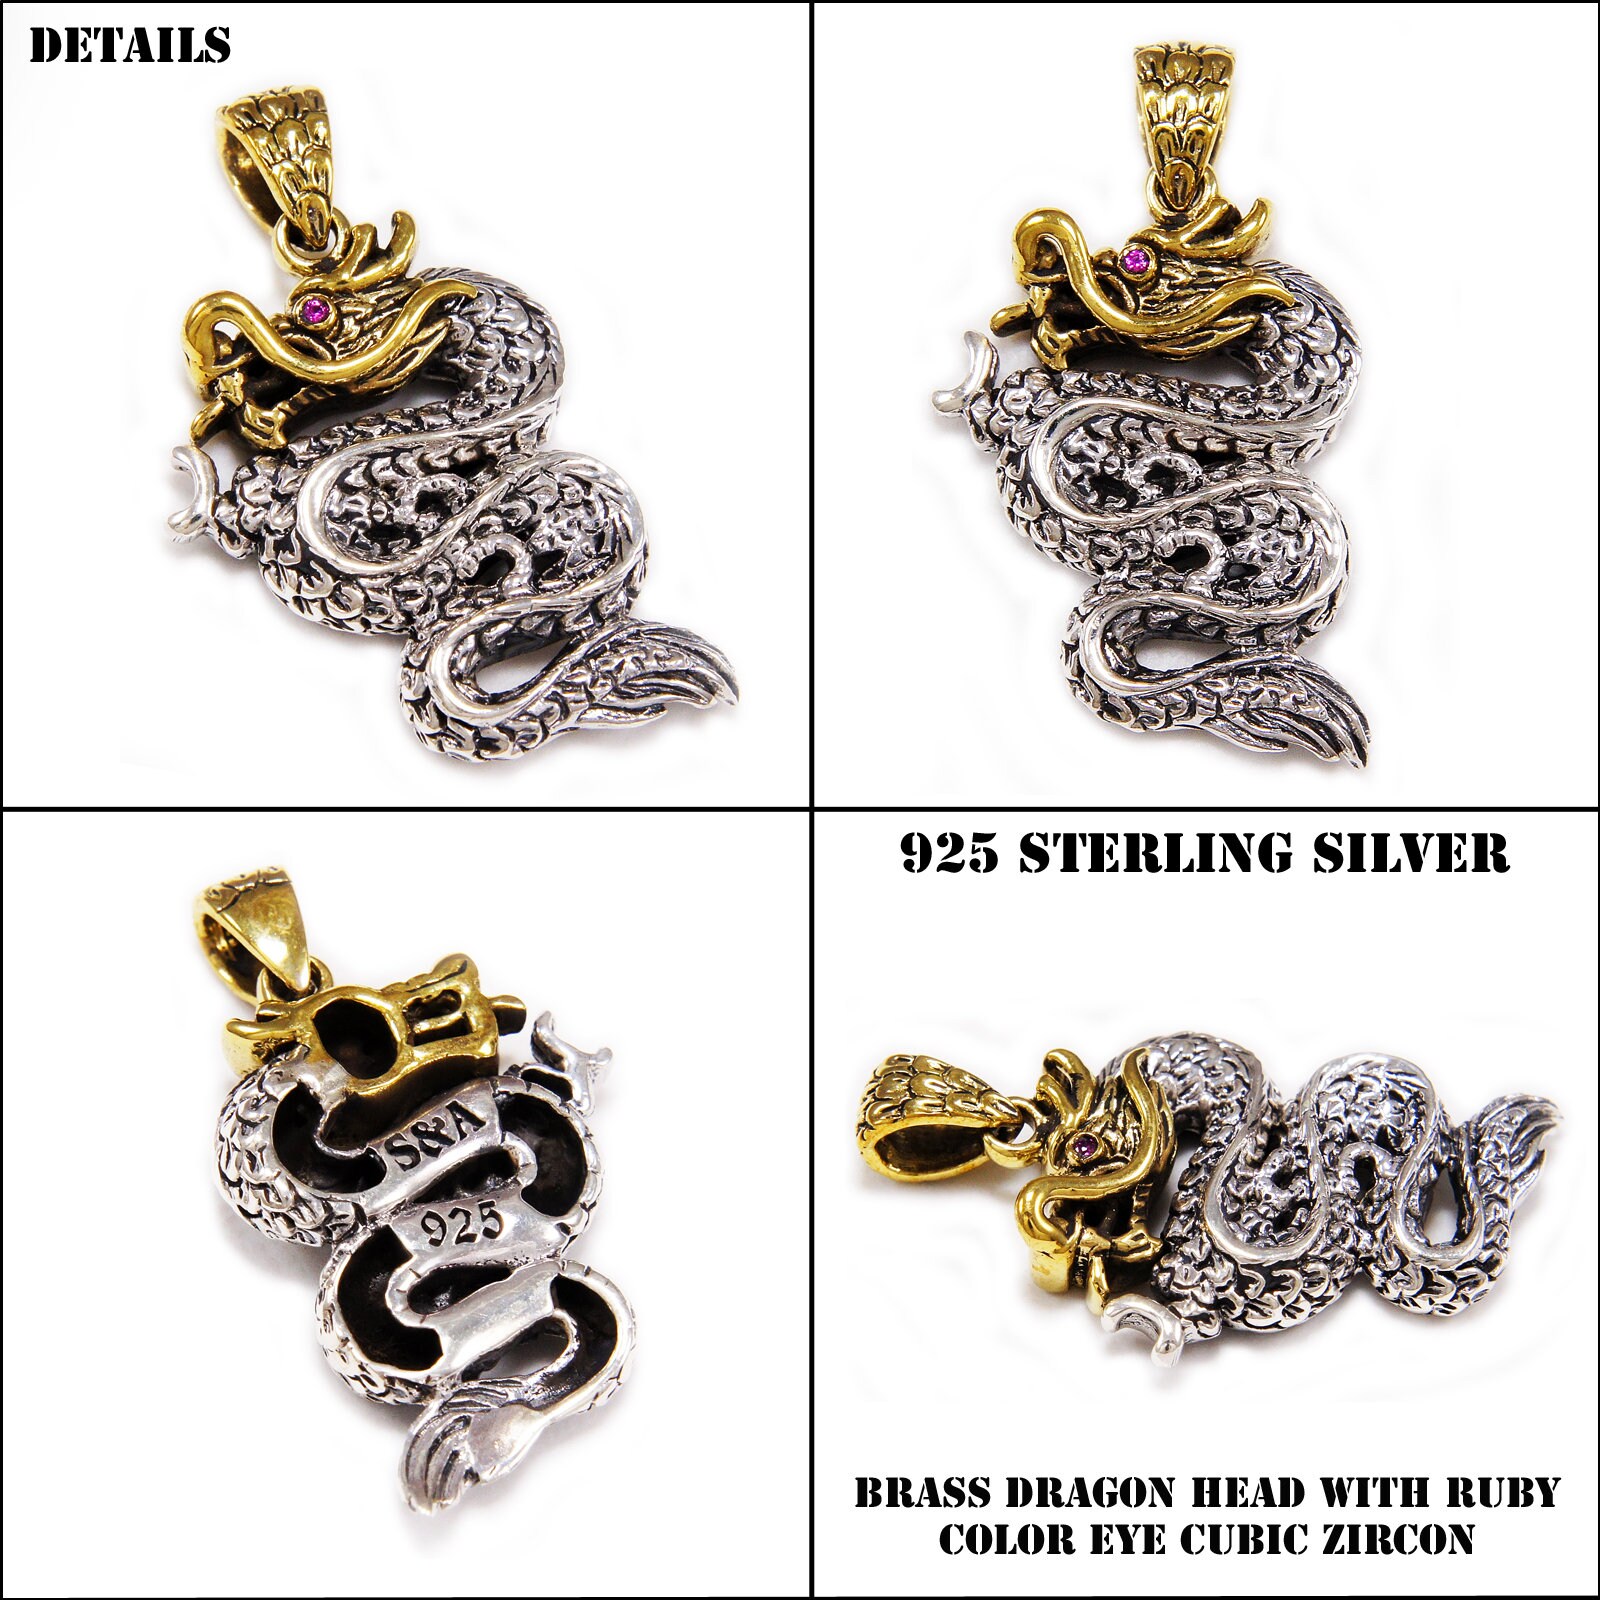 WYSIWYG 10pcs 14x17mm Antique Silver Color Double-Sided Chinese Dragon  Charms Pendant For DIY Jewelry Making